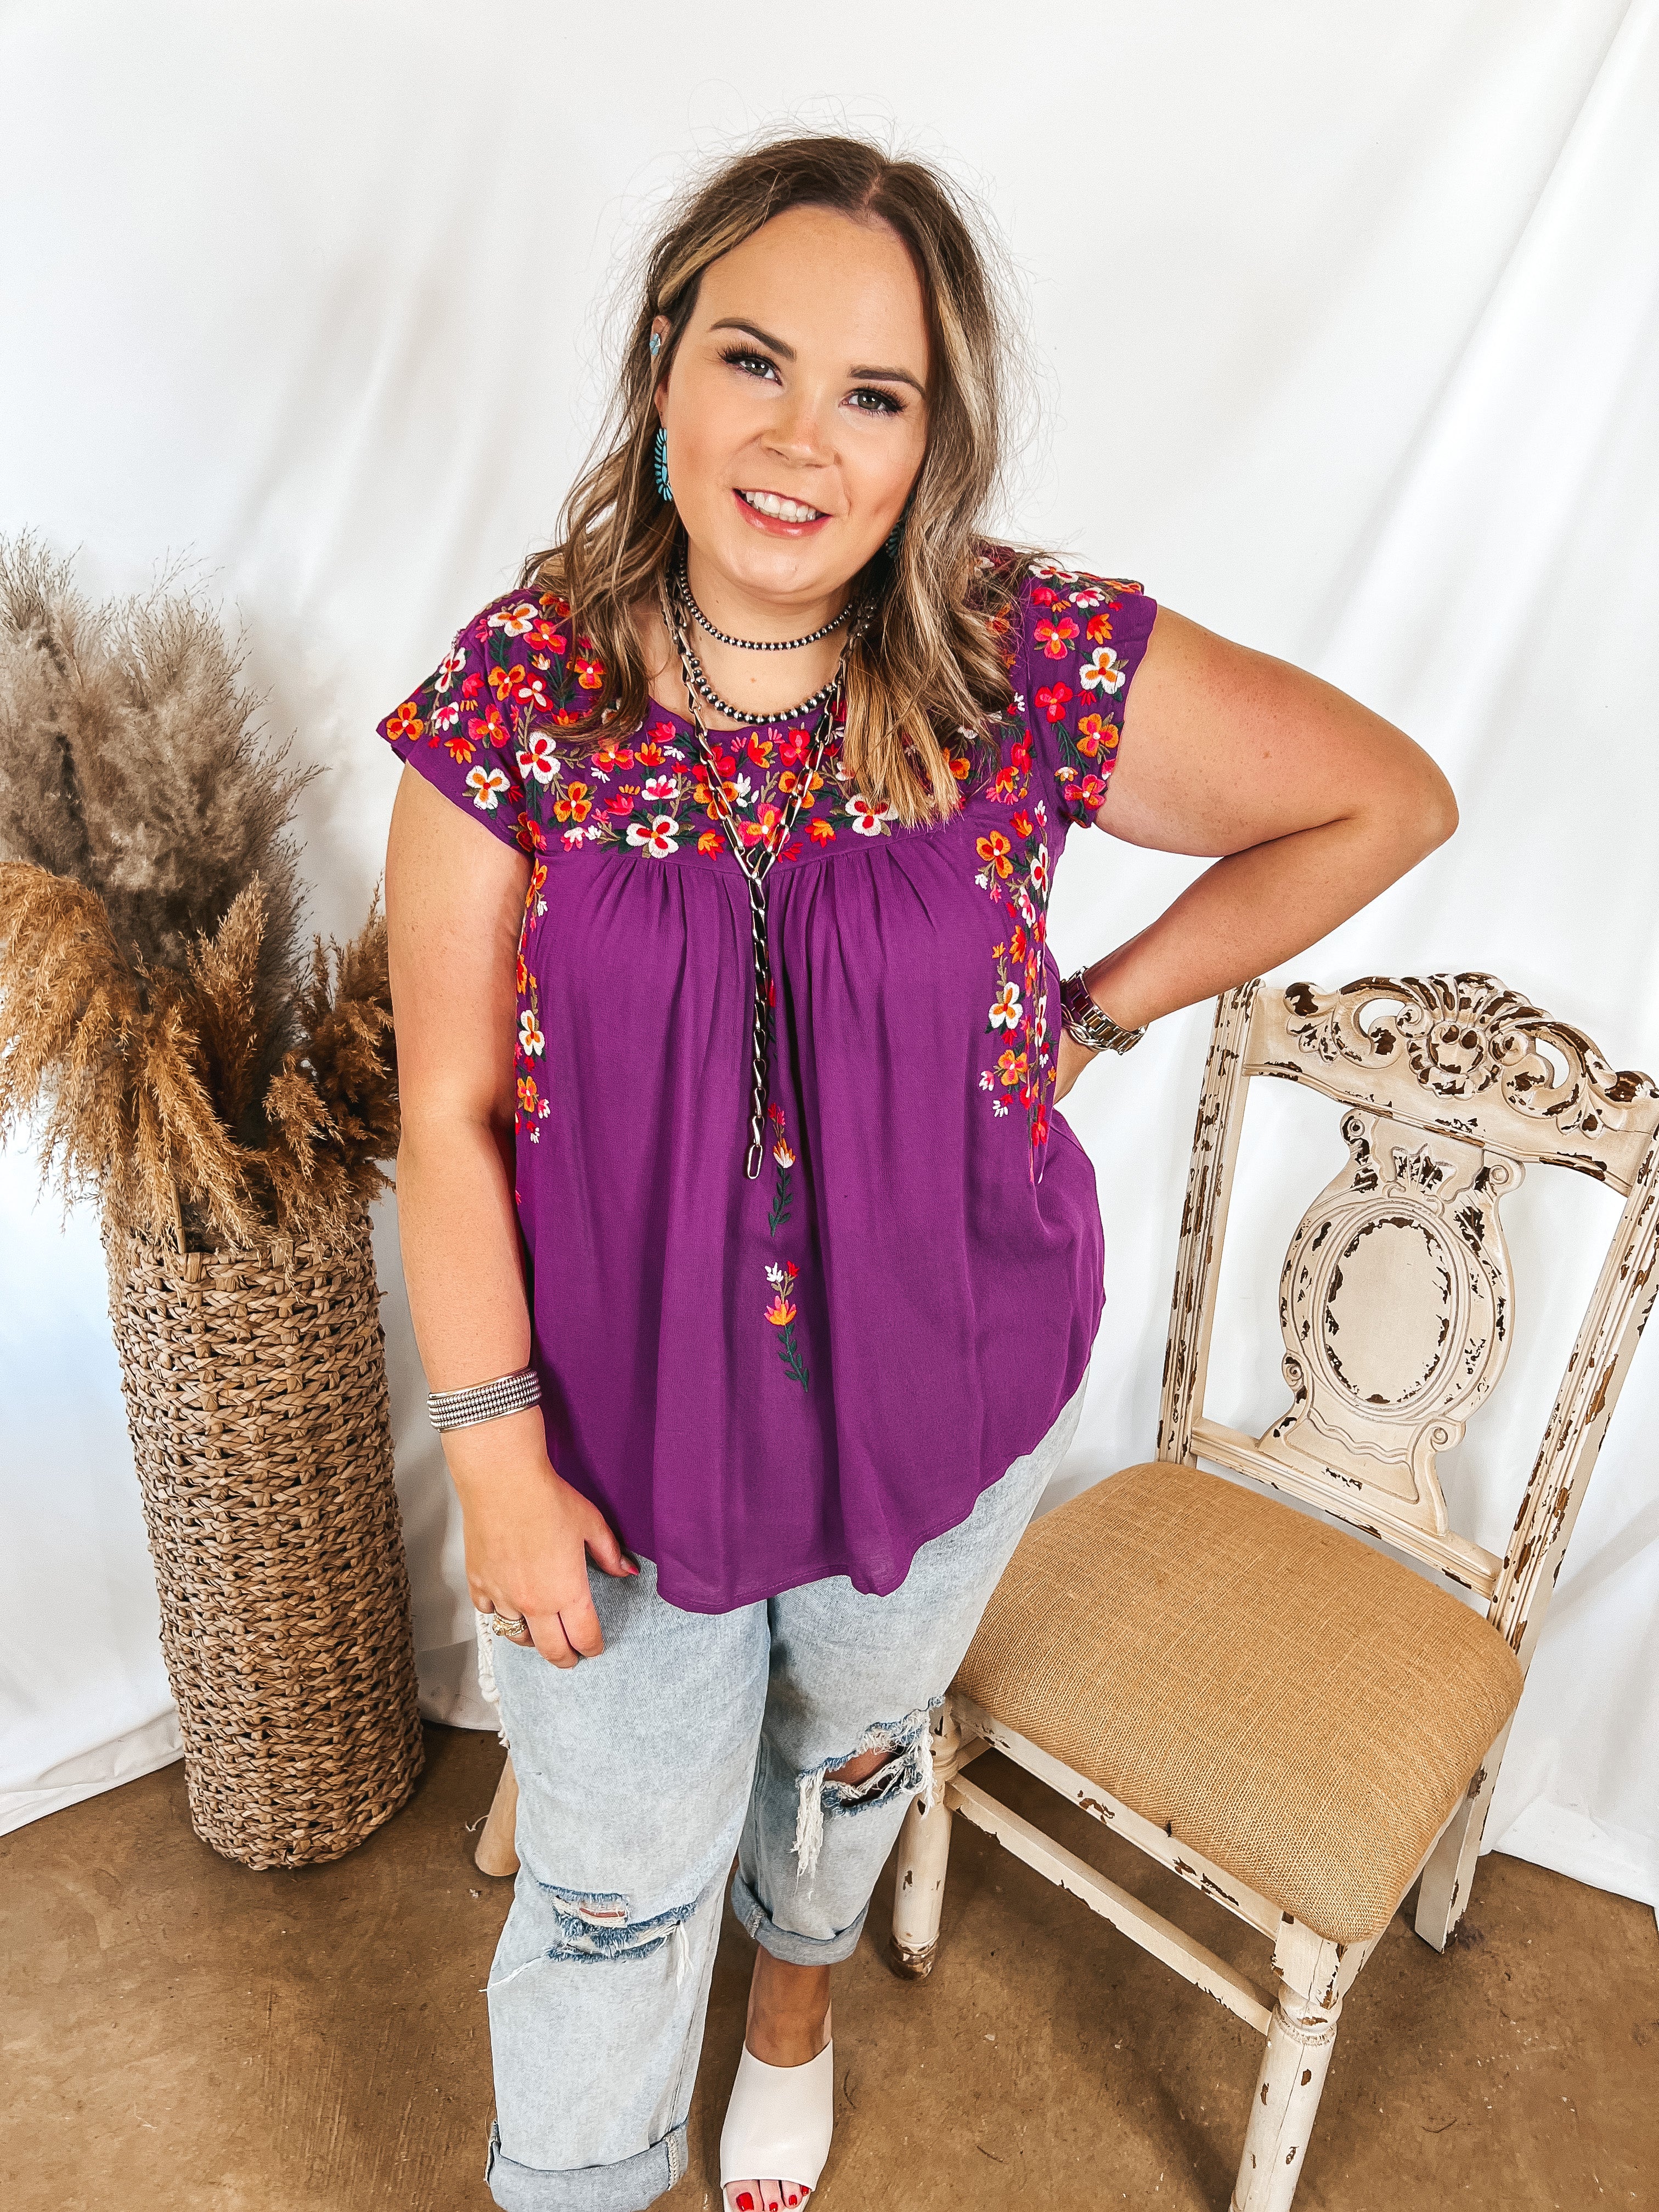 Lajitas Lady Floral Embroidered Babydoll Top in Purple - Giddy Up Glamour Boutique